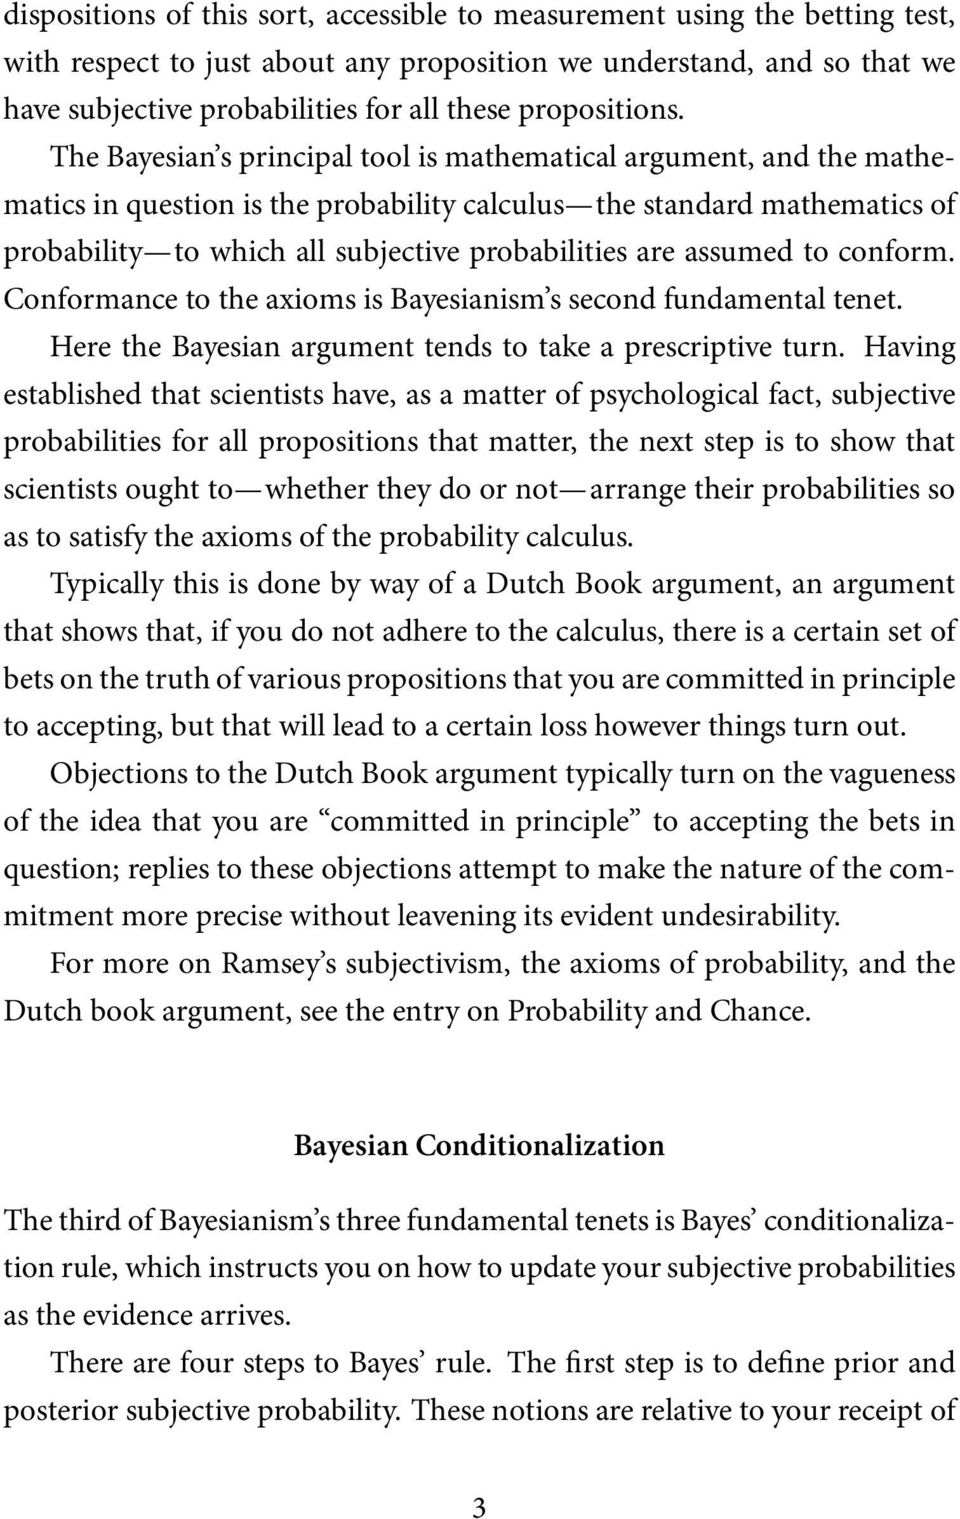 The Bayesian s principal tool is mathematical argument, and the mathematics in question is the probability calculus the standard mathematics of probability to which all subjective probabilities are